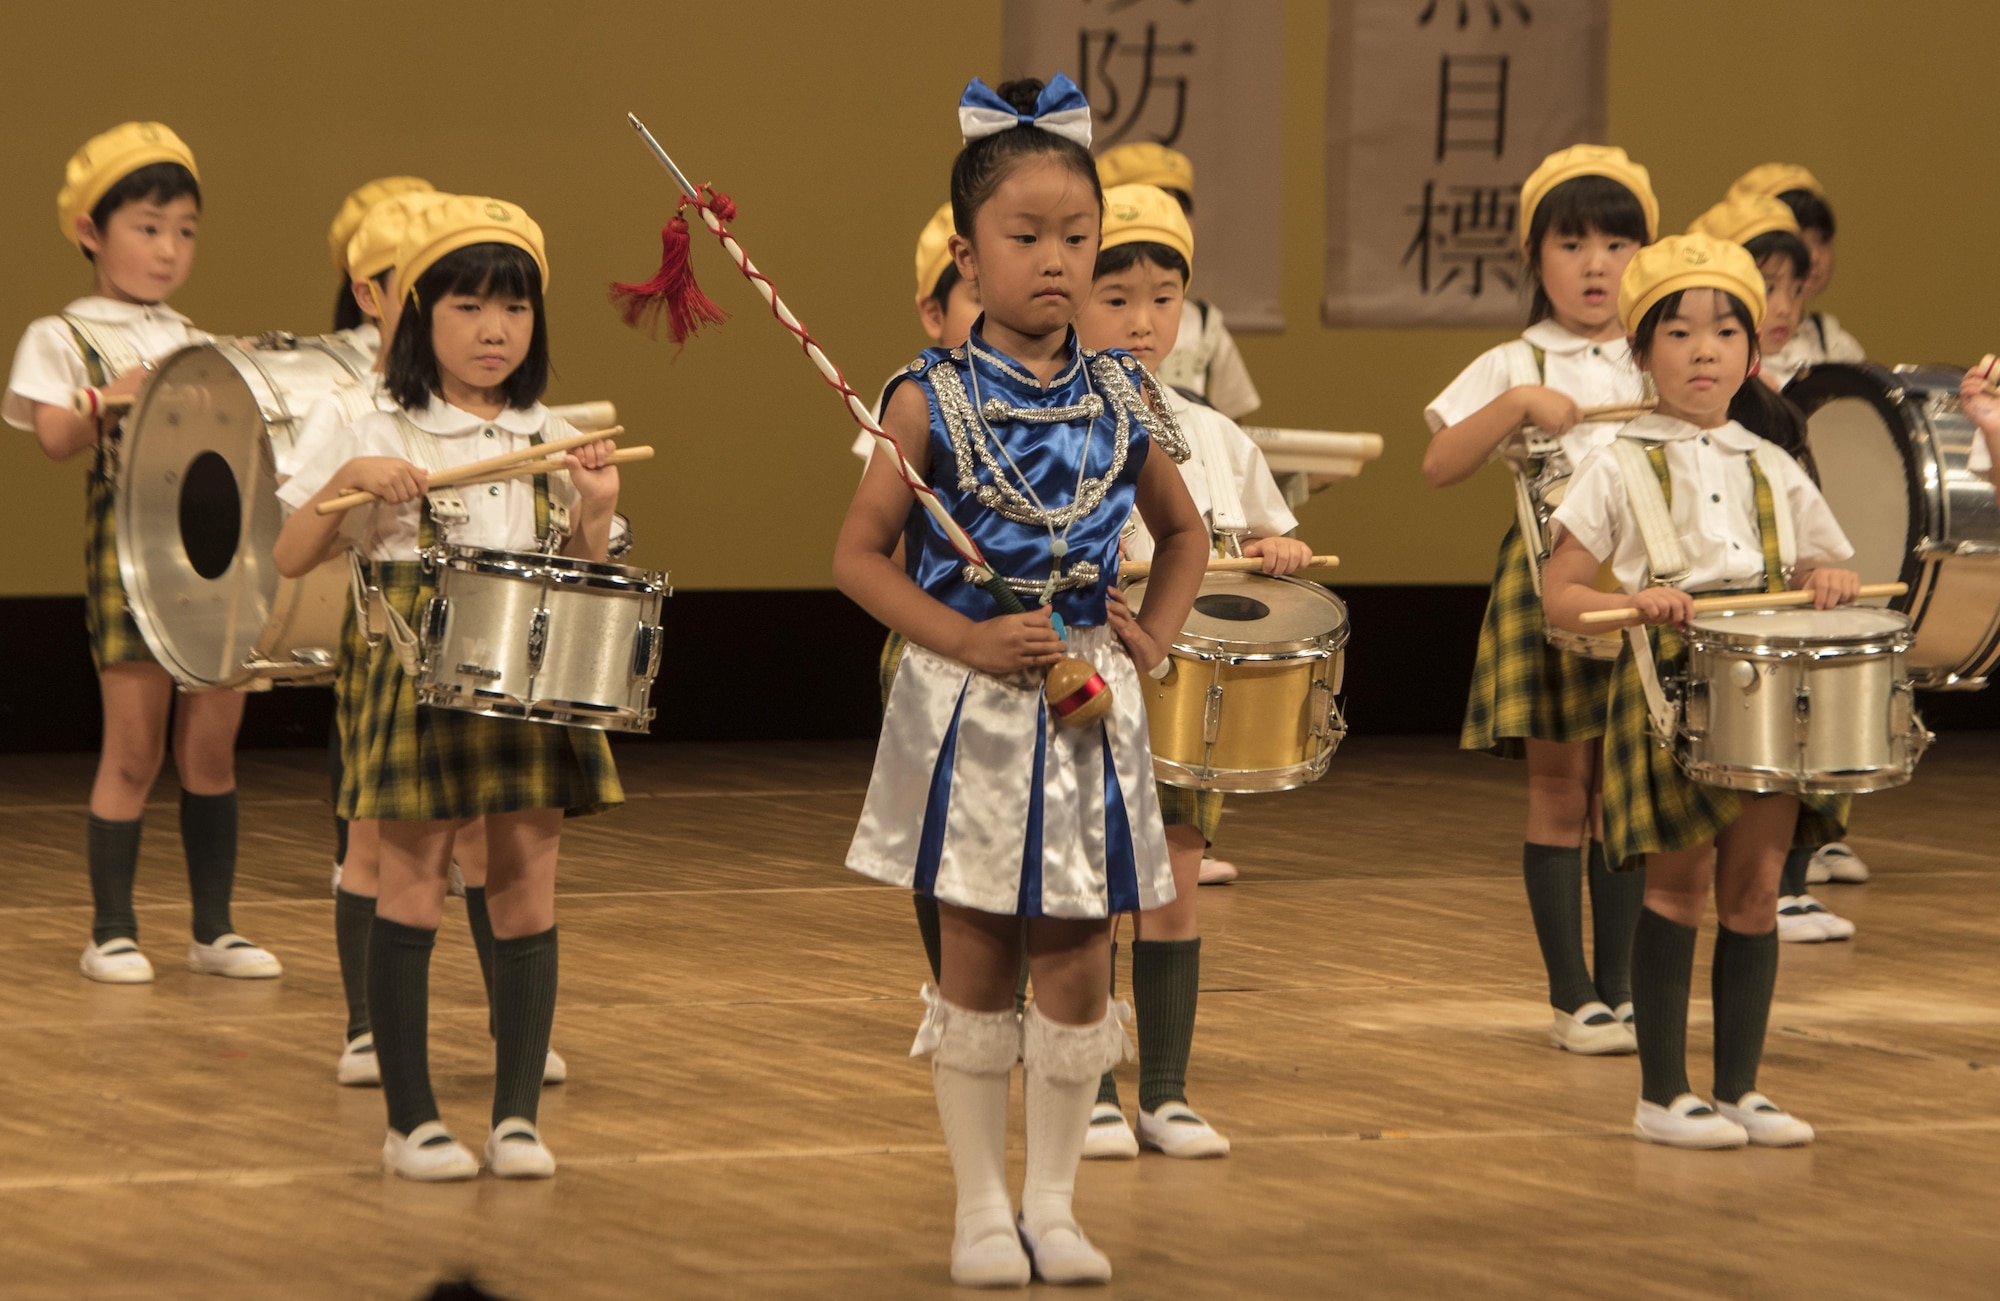 The Misawa Daiichi Kindergarten marching band performs a recital during the 24th Annual Traffic Safety Day in Misawa City, Japan, July, 22, 2016. The demonstration signified the students’ dedication to the traffic safety campaign and helped to focus on the prevention of traffic accidents involving children. (U.S. Air Force photo by Senior Airman Jordyn Fetter)